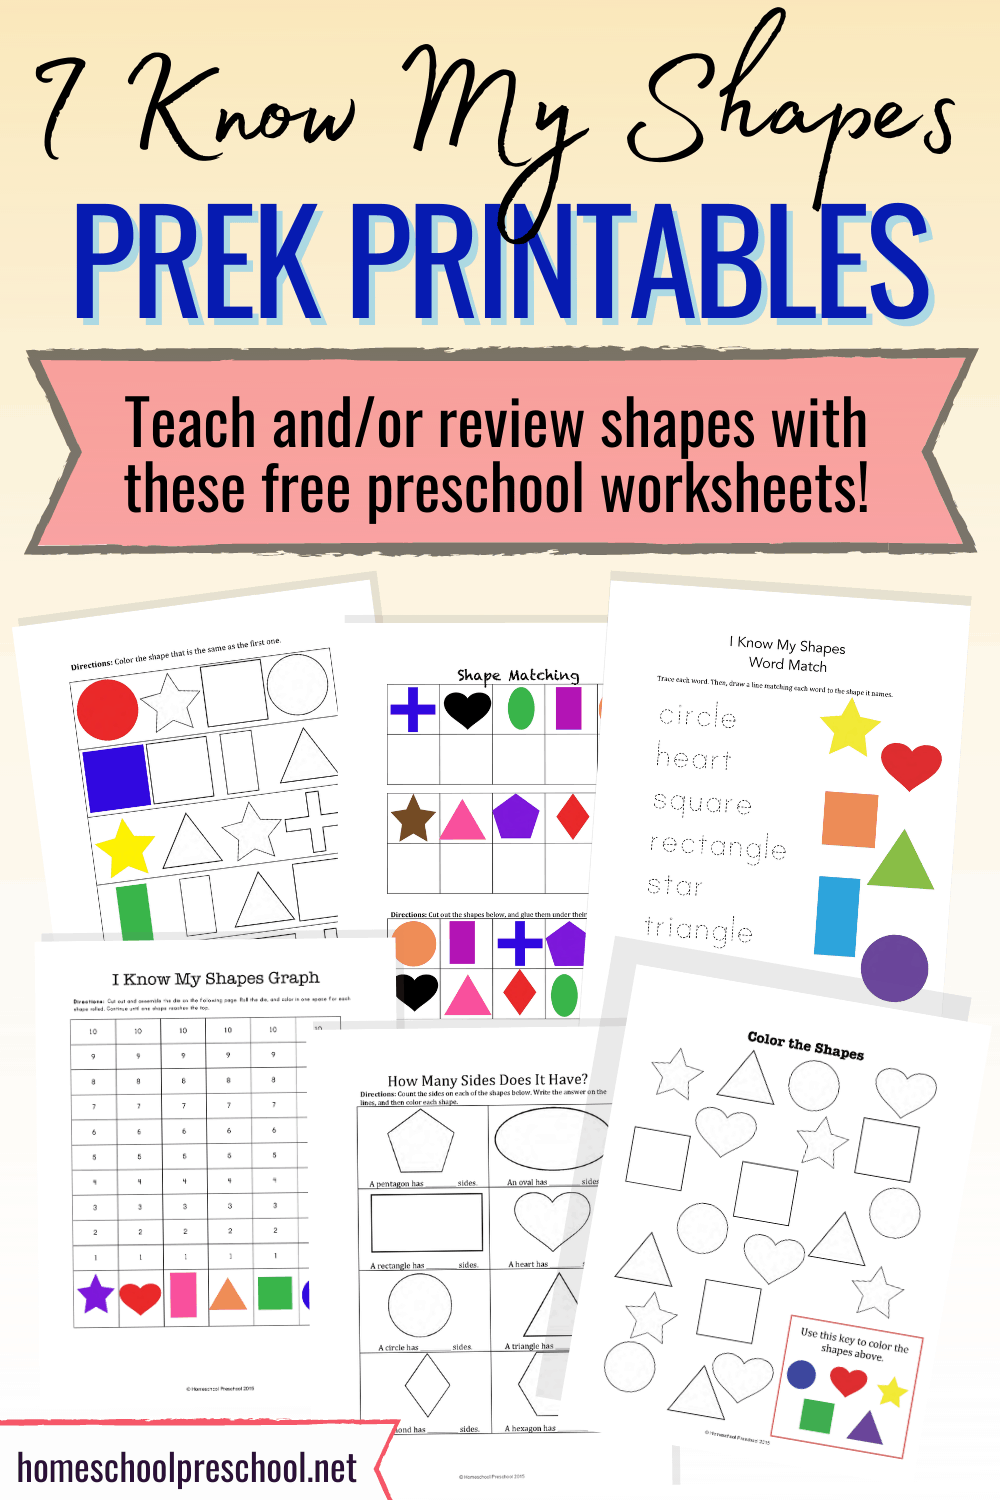 i-know-shapes-1 Preschool Activities to Teach Shapes